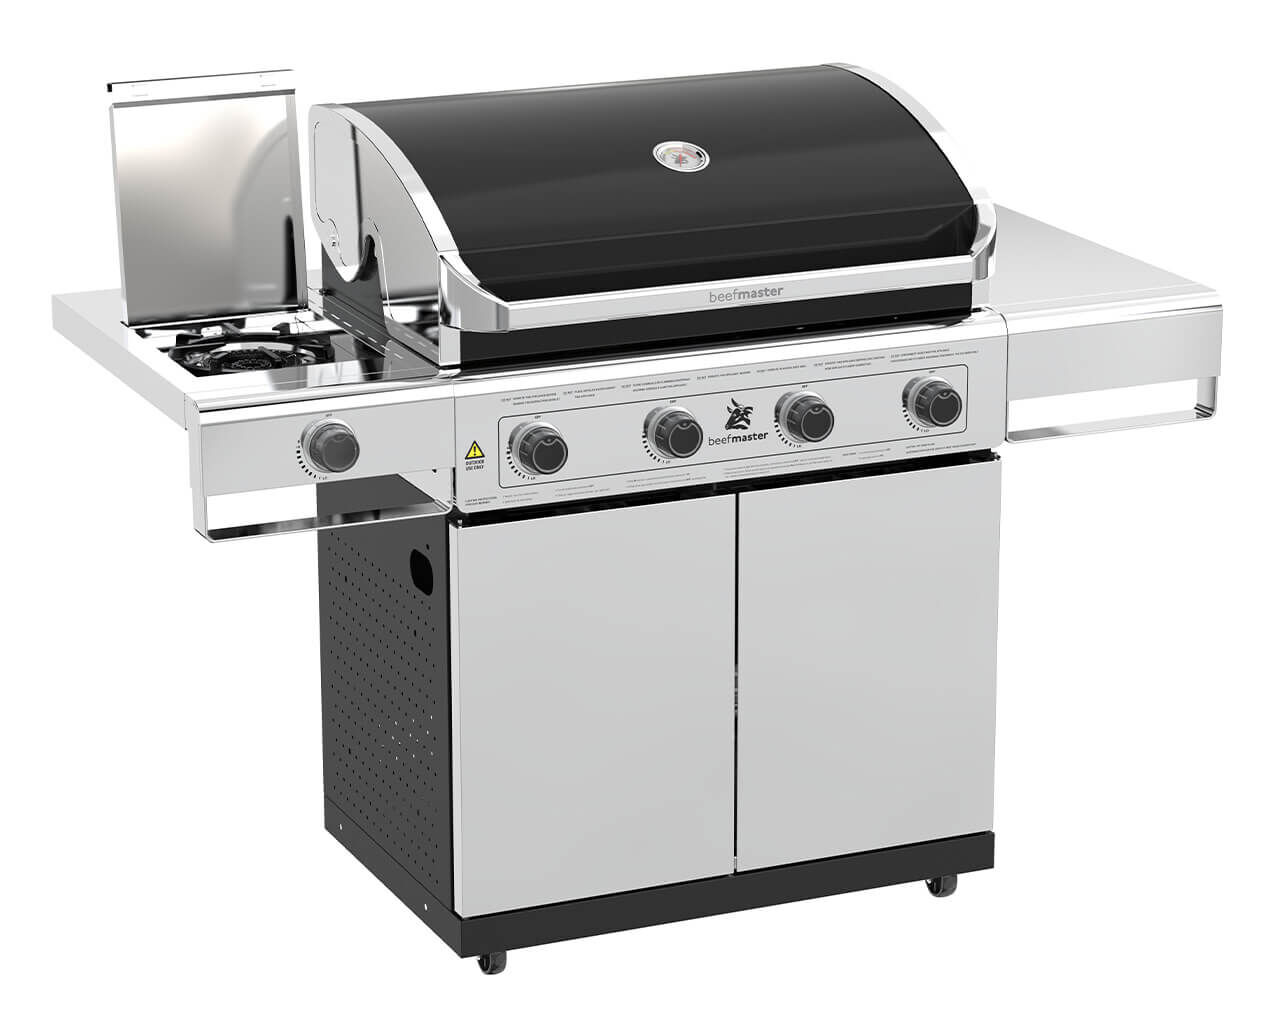 Beefmaster Classic 4 Burner BBQ on Deluxe Cart with Cast Iron Side Burner